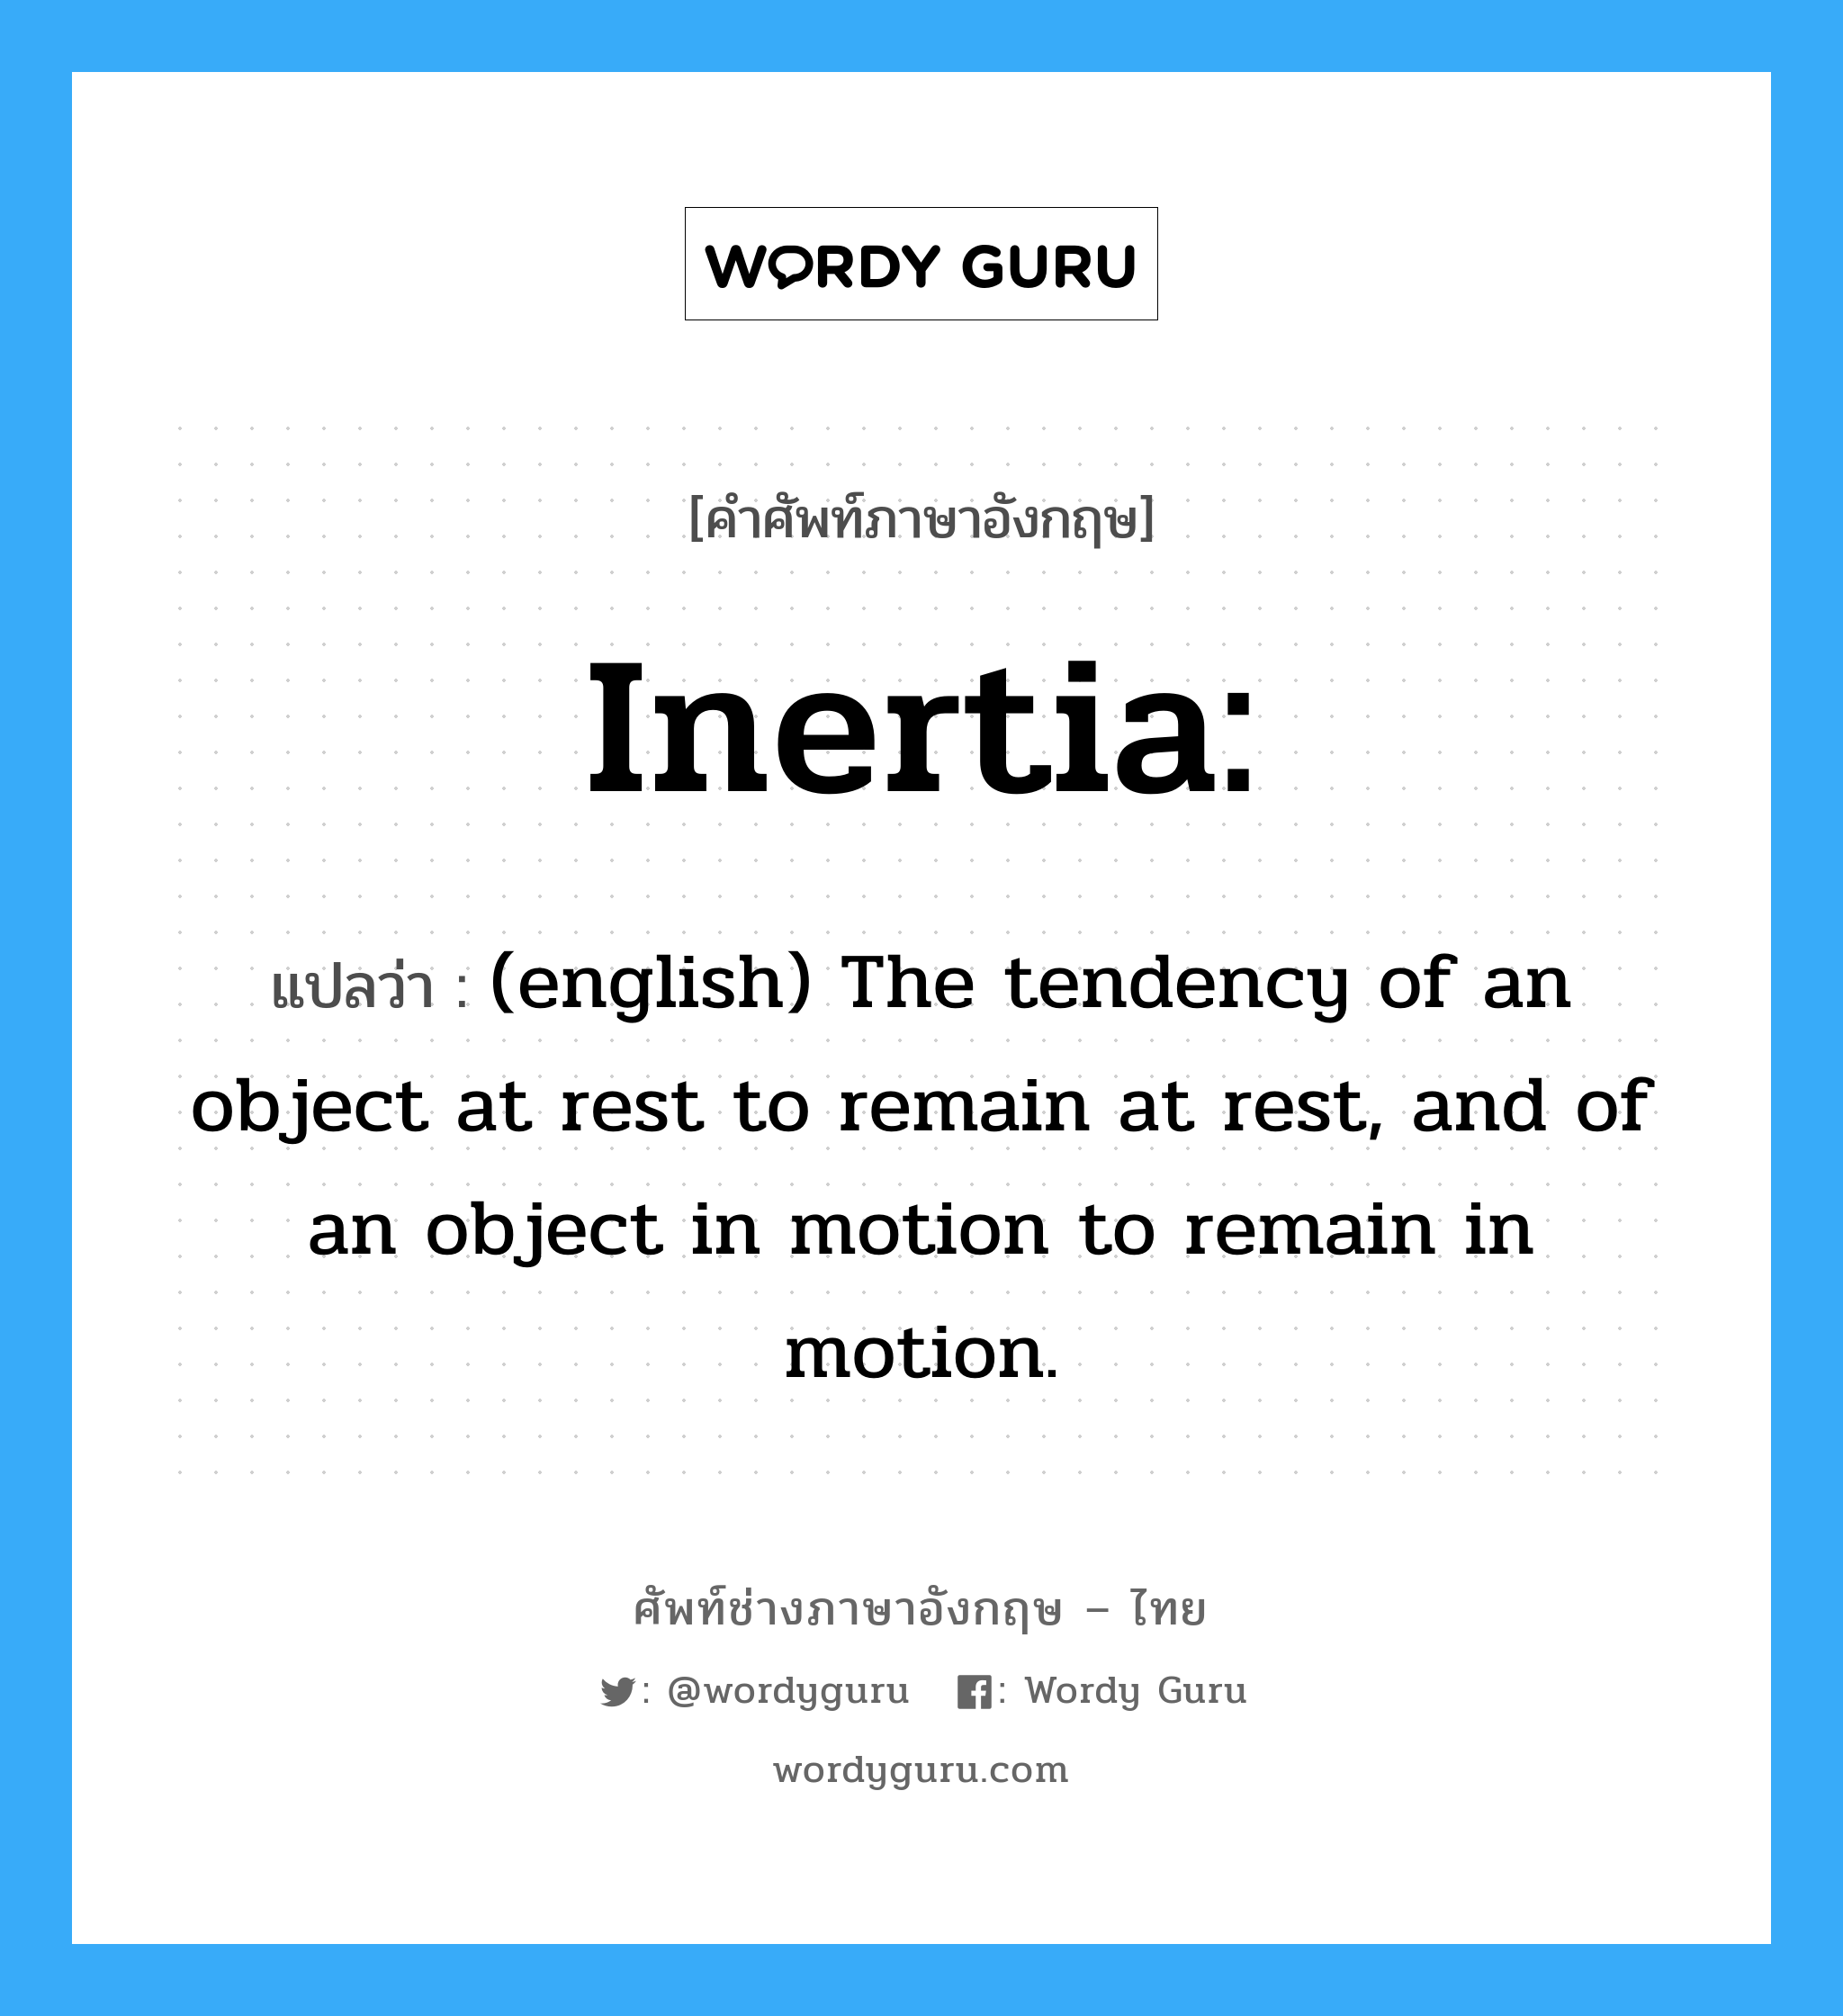 inertia แปลว่า?, คำศัพท์ช่างภาษาอังกฤษ - ไทย Inertia: คำศัพท์ภาษาอังกฤษ Inertia: แปลว่า (english) The tendency of an object at rest to remain at rest, and of an object in motion to remain in motion.